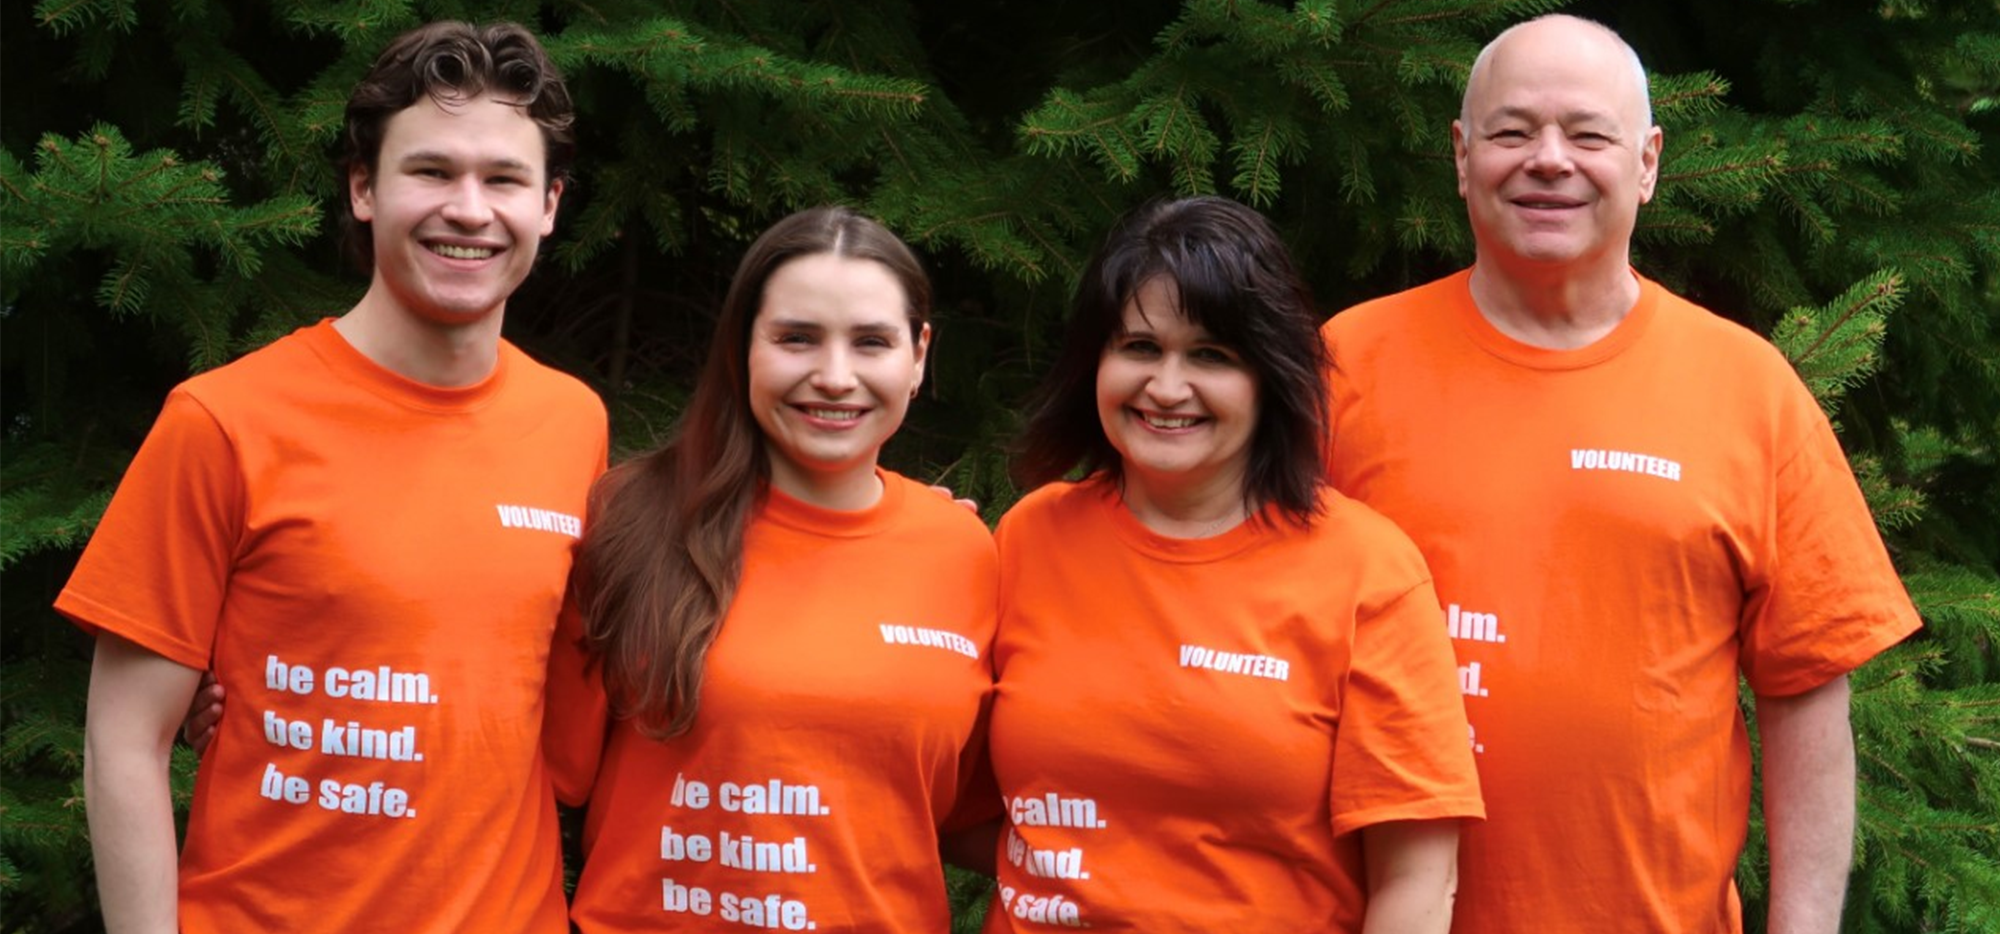 The Tennant family wearing orange volunteer shirts and standing in front of trees